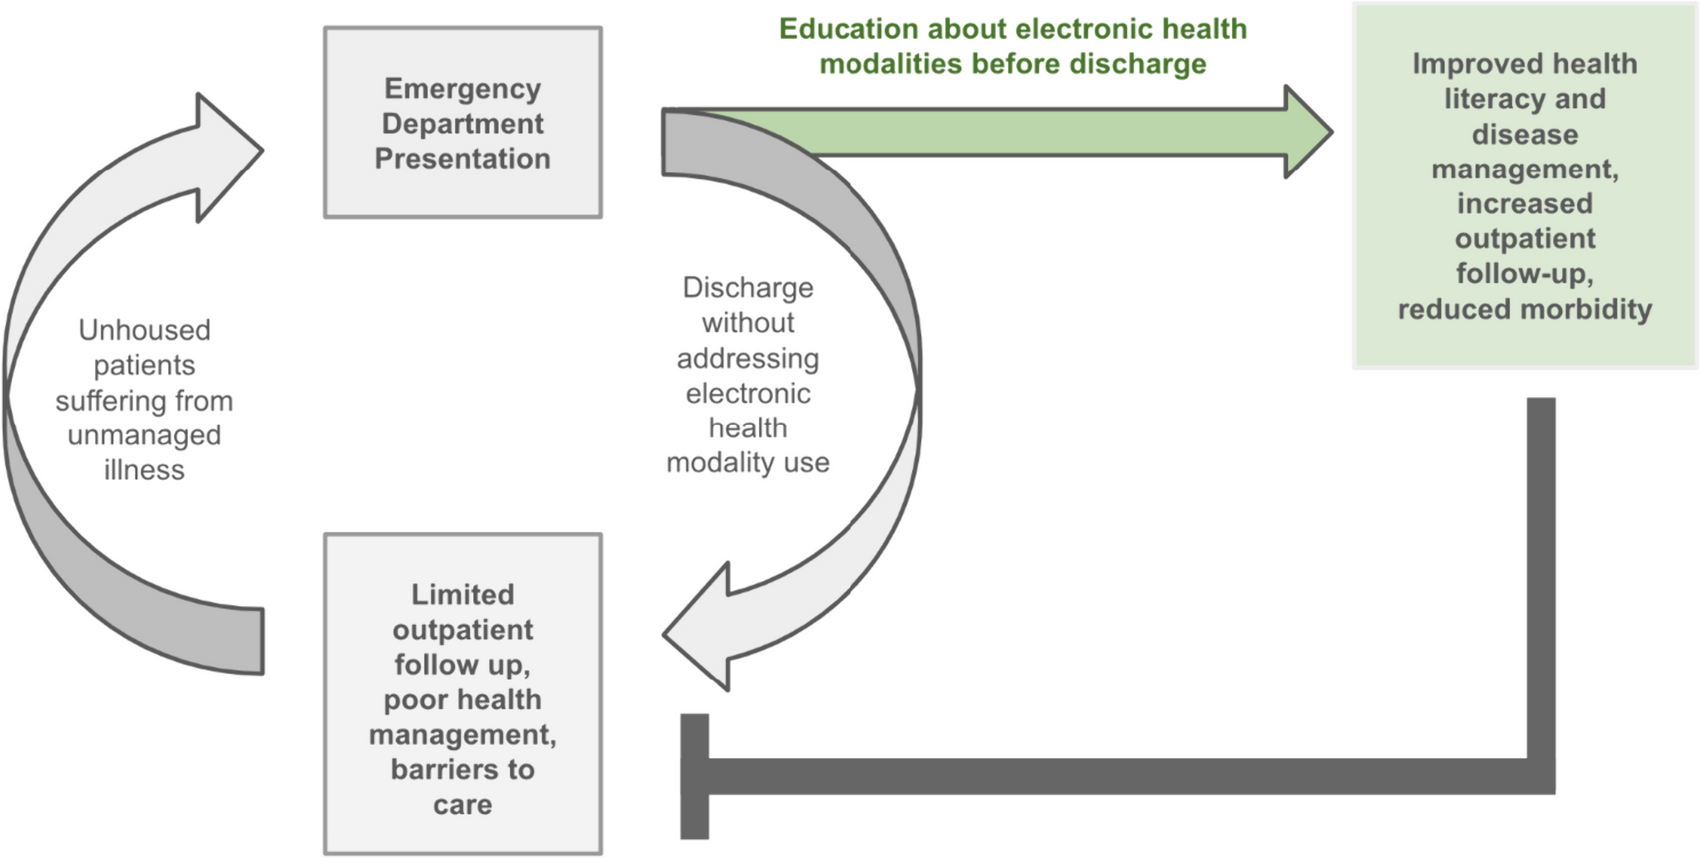 Leveraging Electronic Health Modalities to Enhance Care for Unhoused Populations and Reduce Emergency Department Overutilization: A Review of the Existing Literature